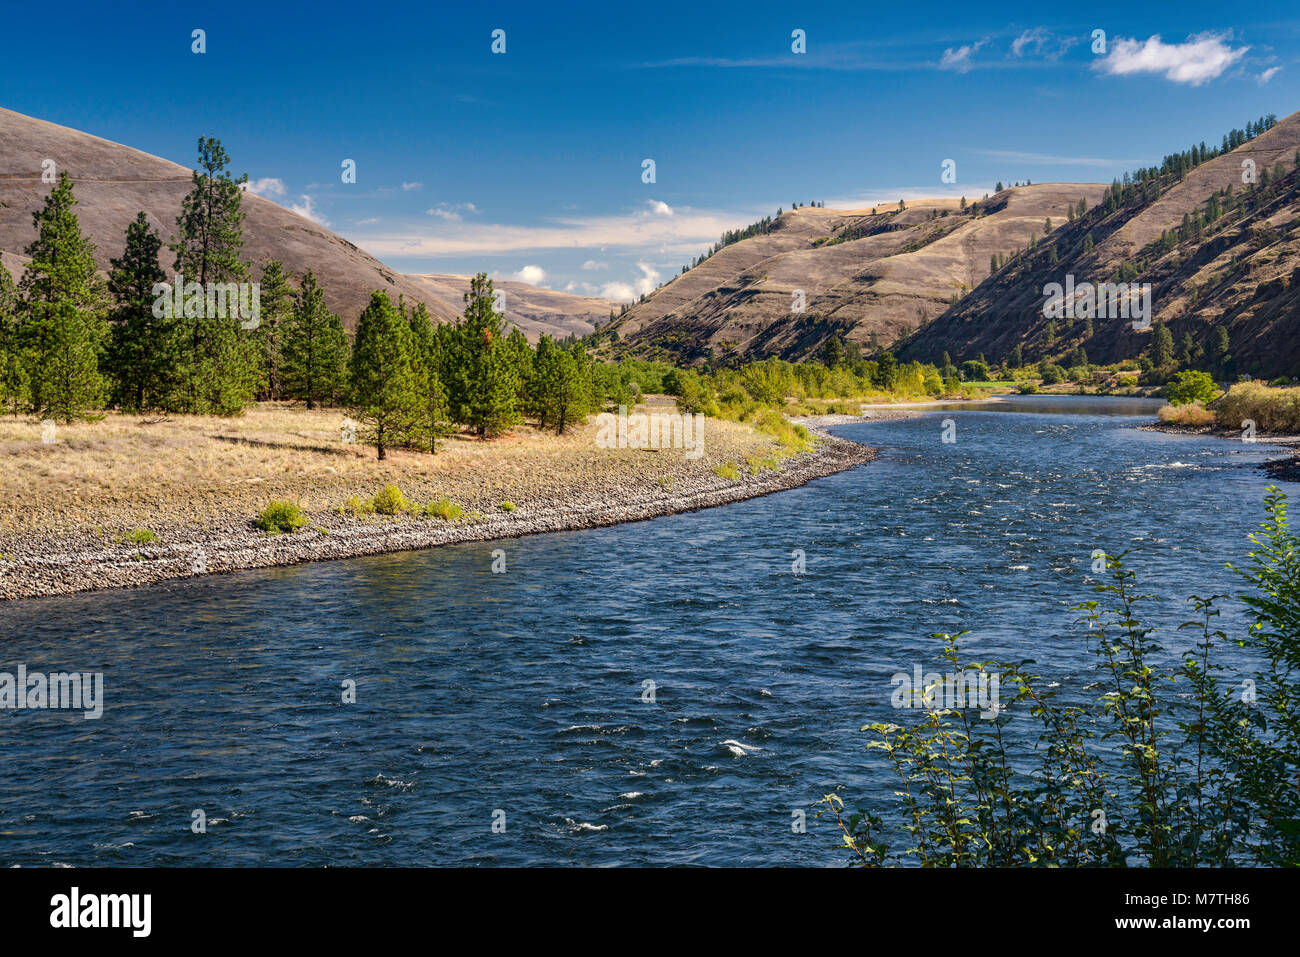 Clearwater River Canyon, Northwest Passage Scenic Byway, Nez Perce Trail, Nez Perce Indian Reservation, near Myrtle, Idaho, USA Stock Photo